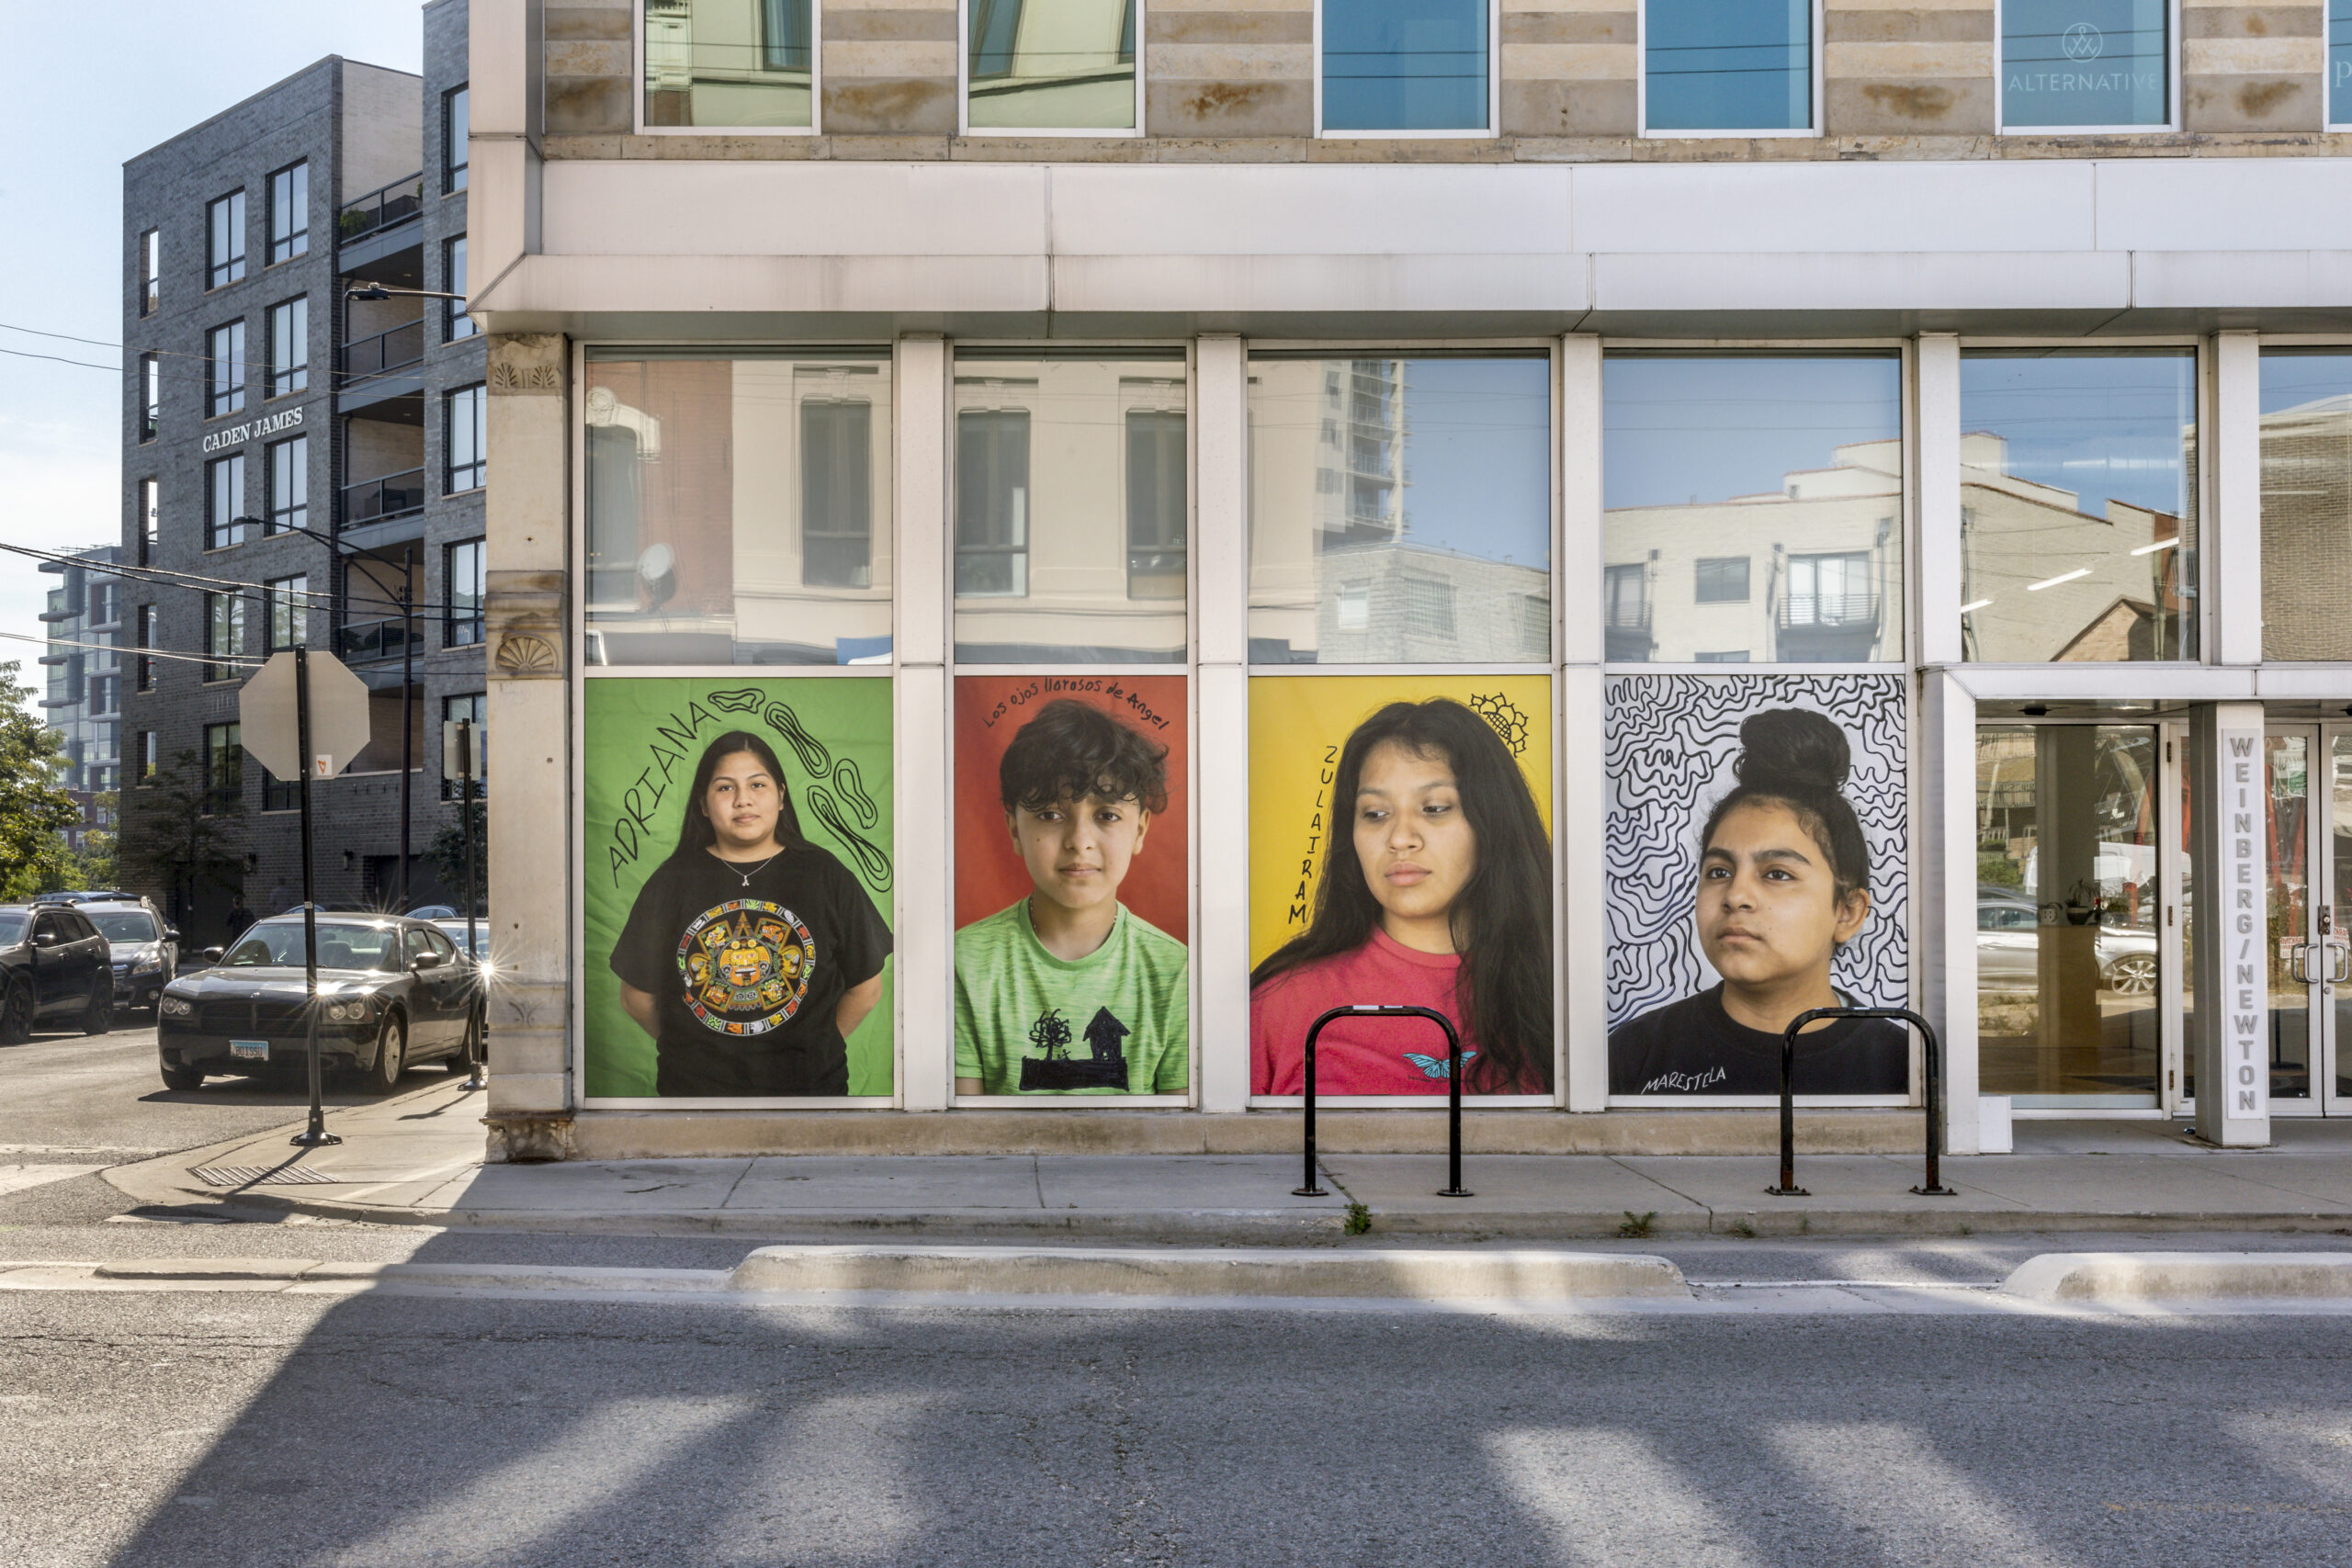 Street level of the gallery featuring large scale window coverings of student portraits.